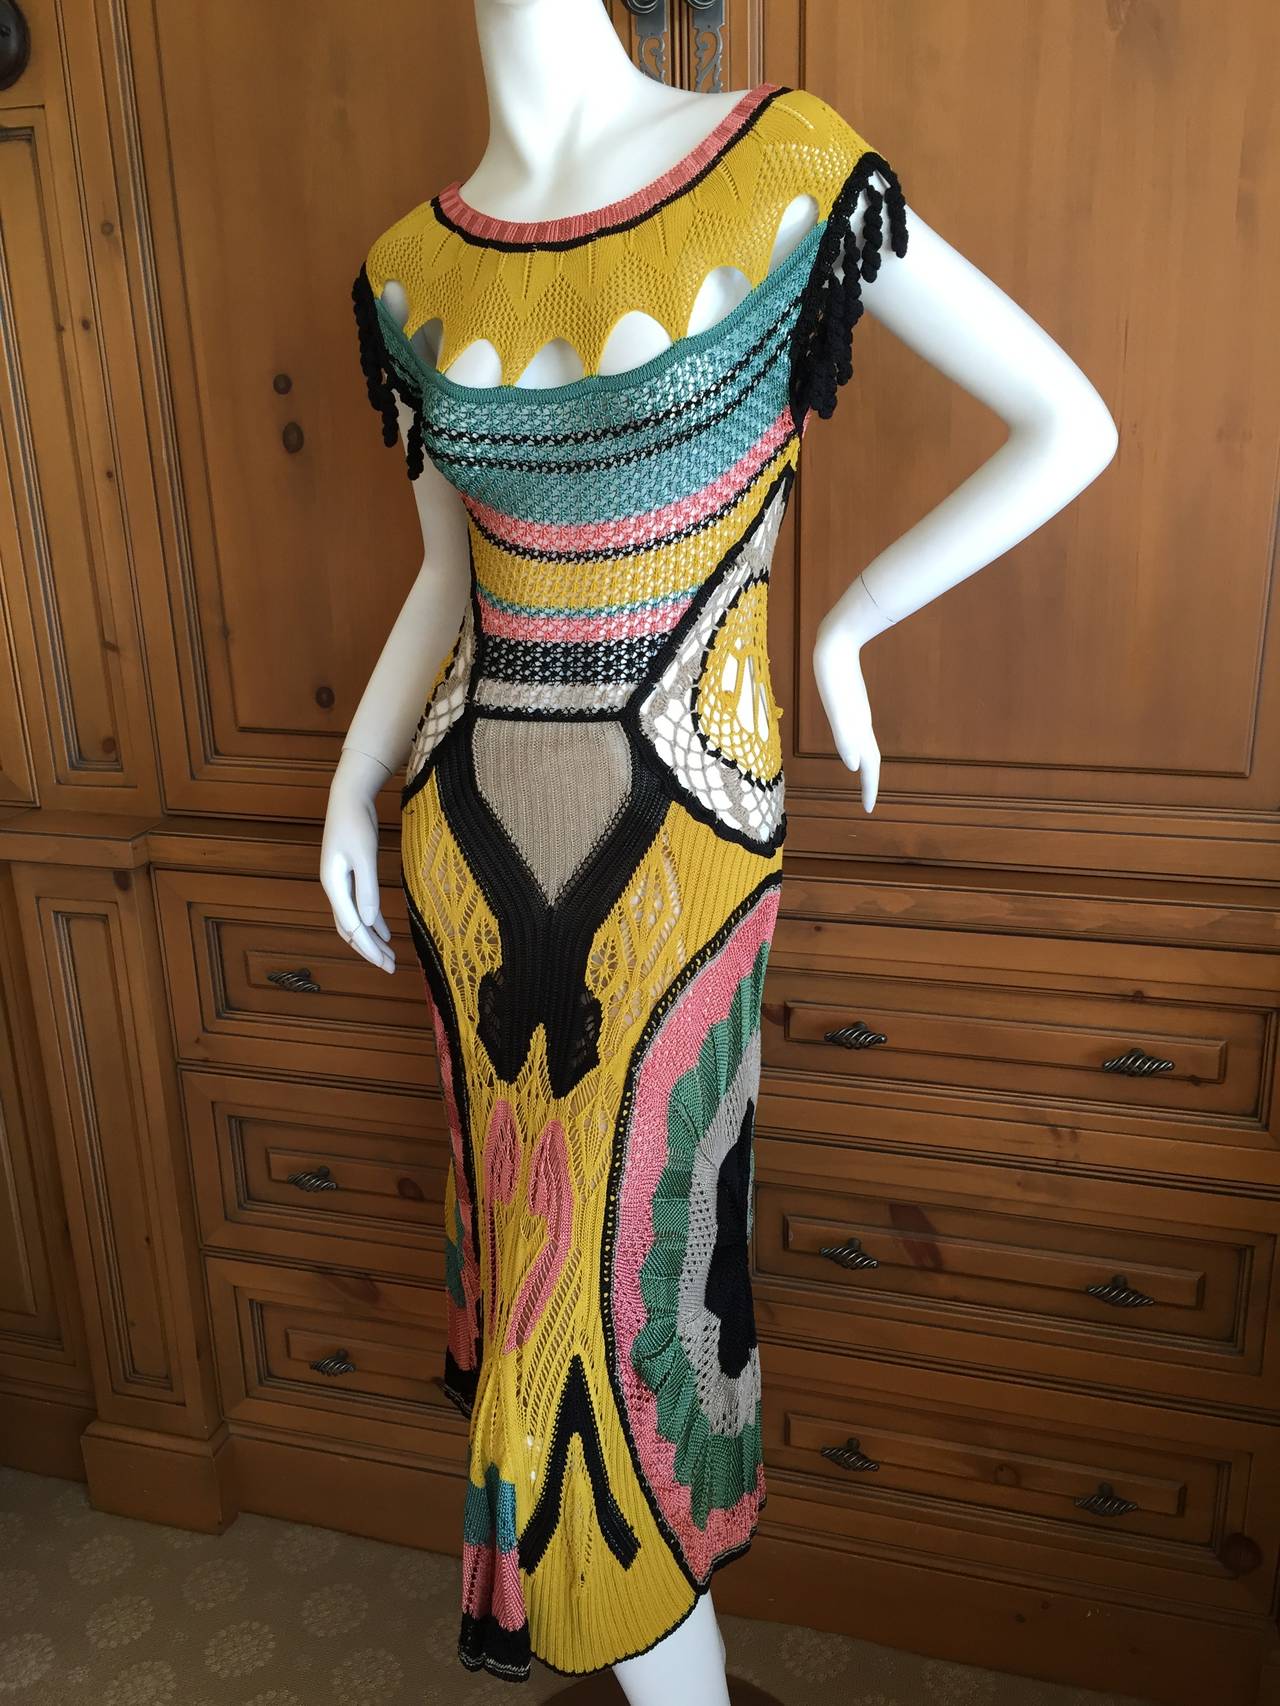 Jean Paul Gaultier Crochet Multicolor Dress.
This is such a great dress, a delightful tribute to the genius of JPG.
The side panels spell JPG in detail.
There is a lot of stretch in this .